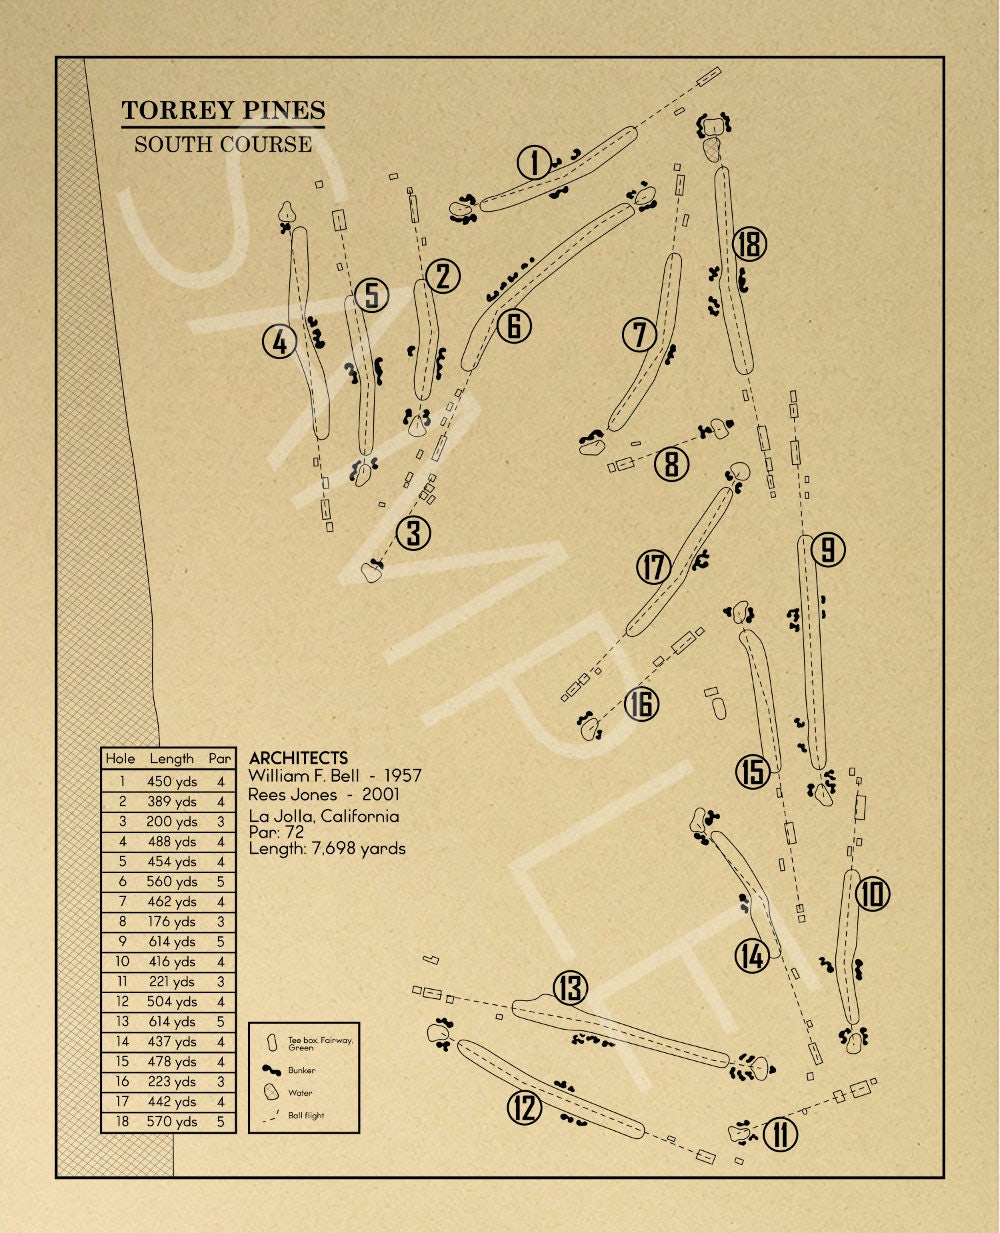 Torrey Pines Golf Course - South Course Outline (Print)